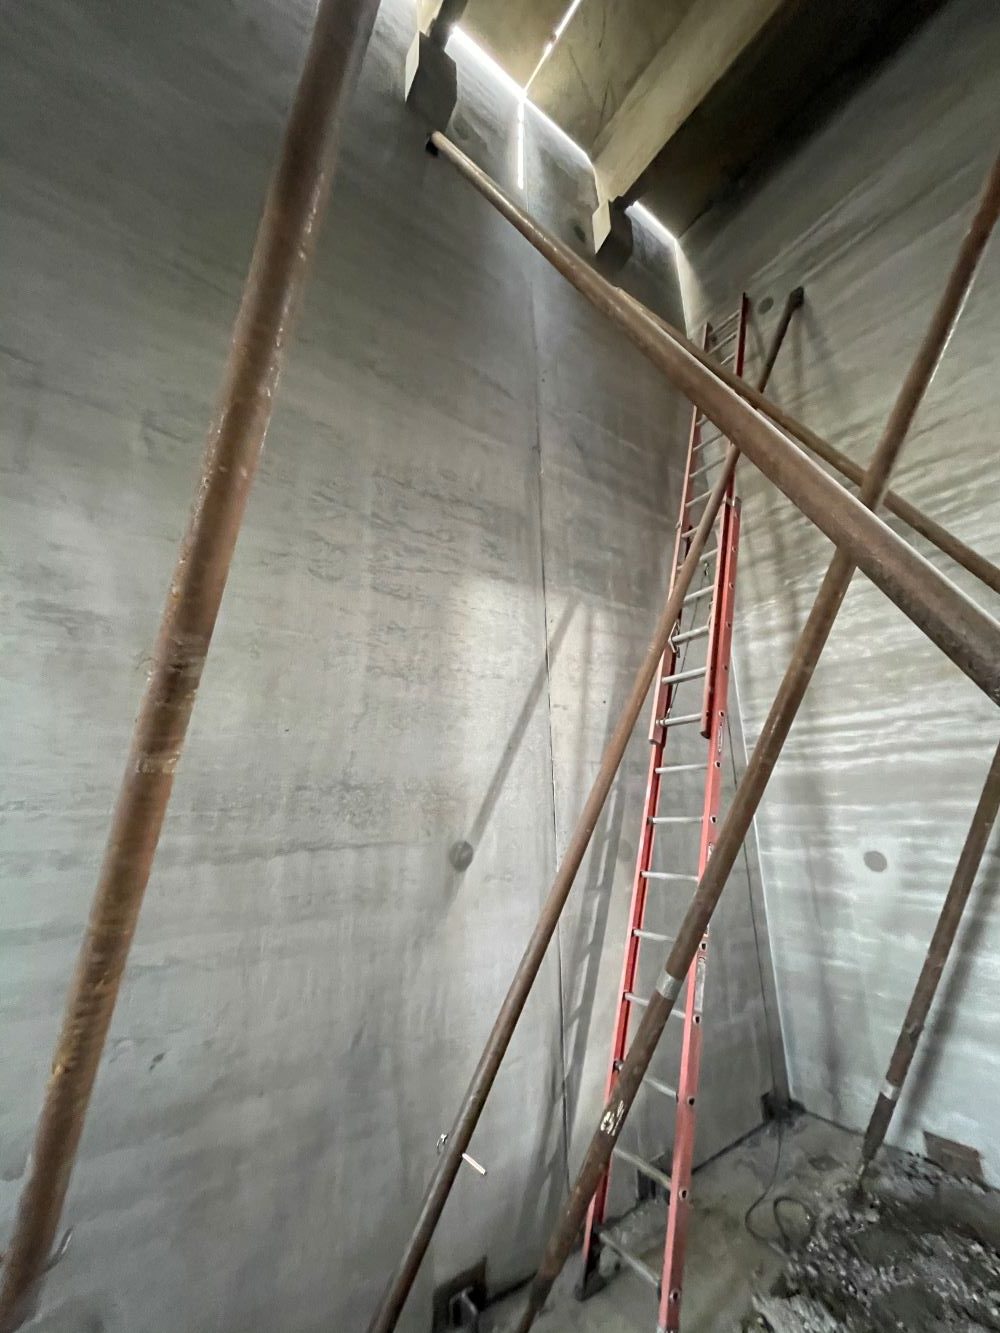 Steel beams and concrete walls